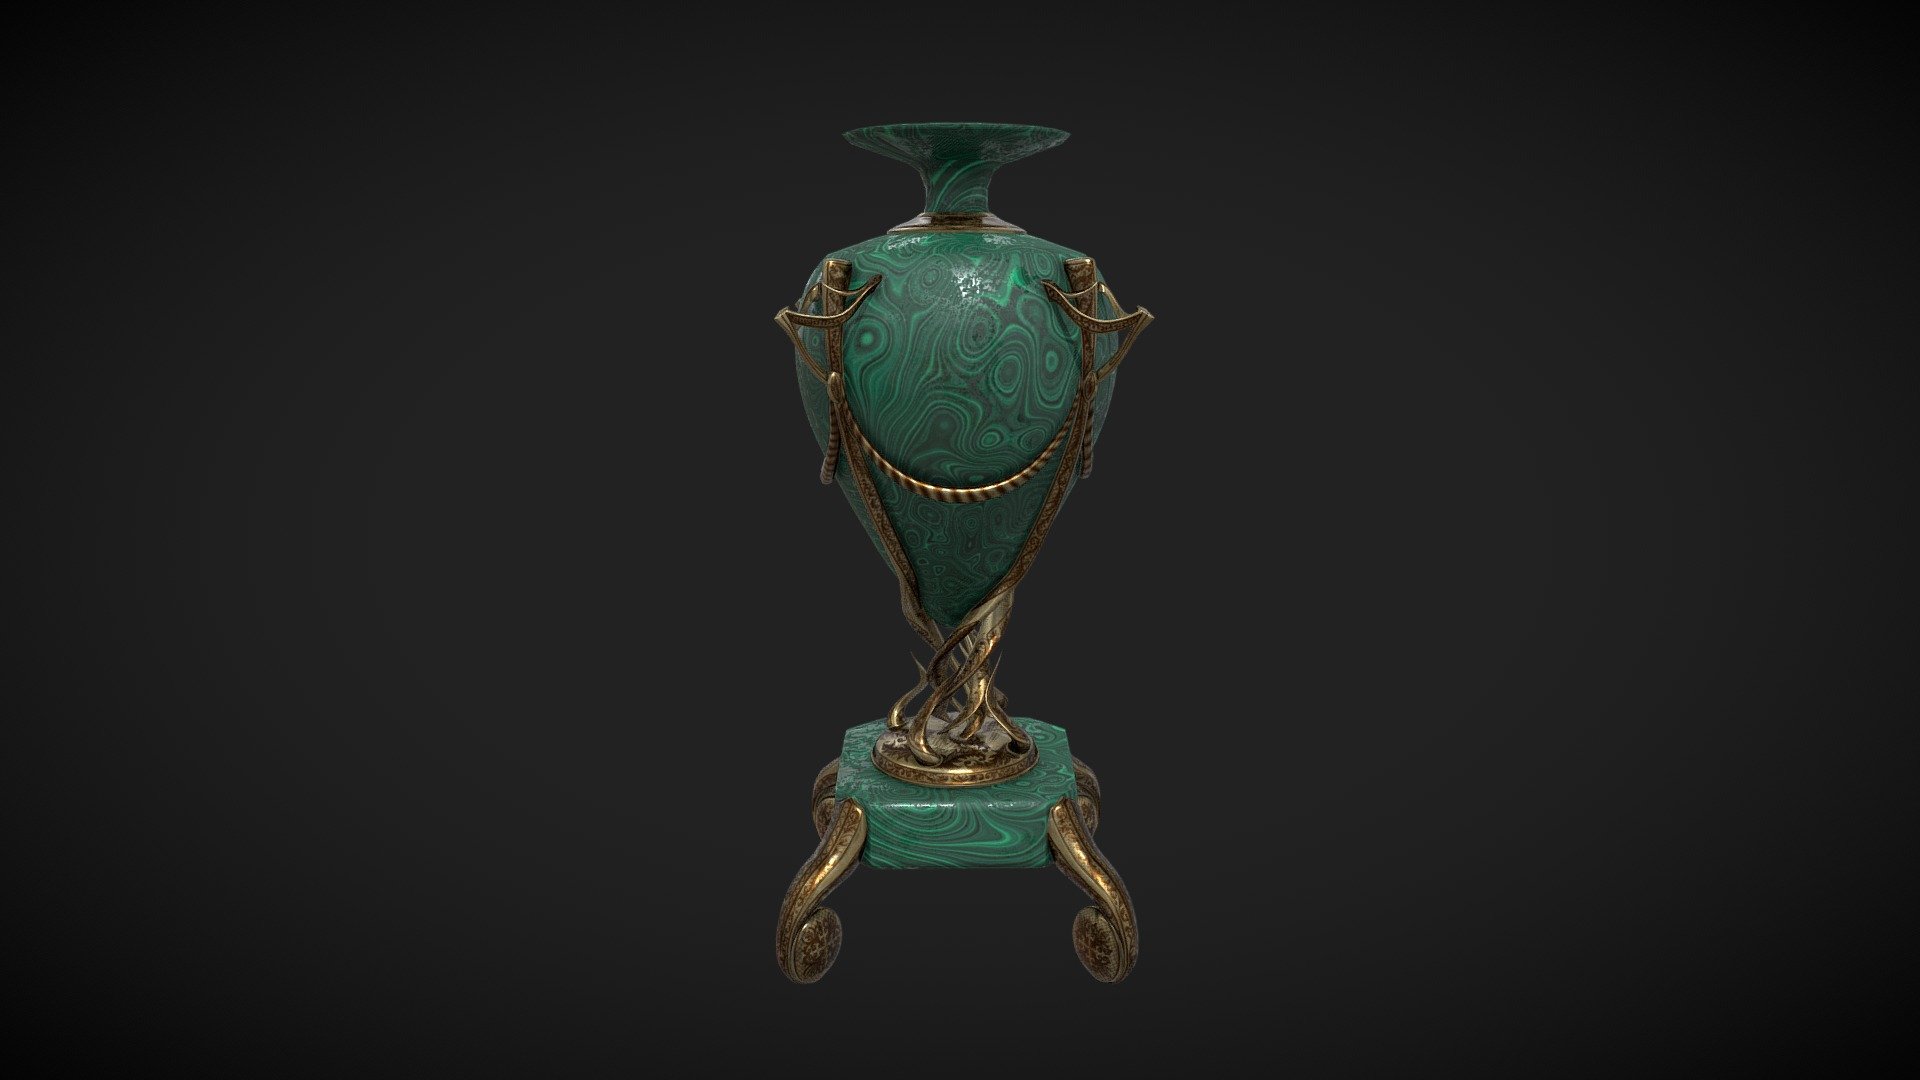 A second model fort he Specialist Pathway project. A posh but old and dusted gold and malachite vase 3d model